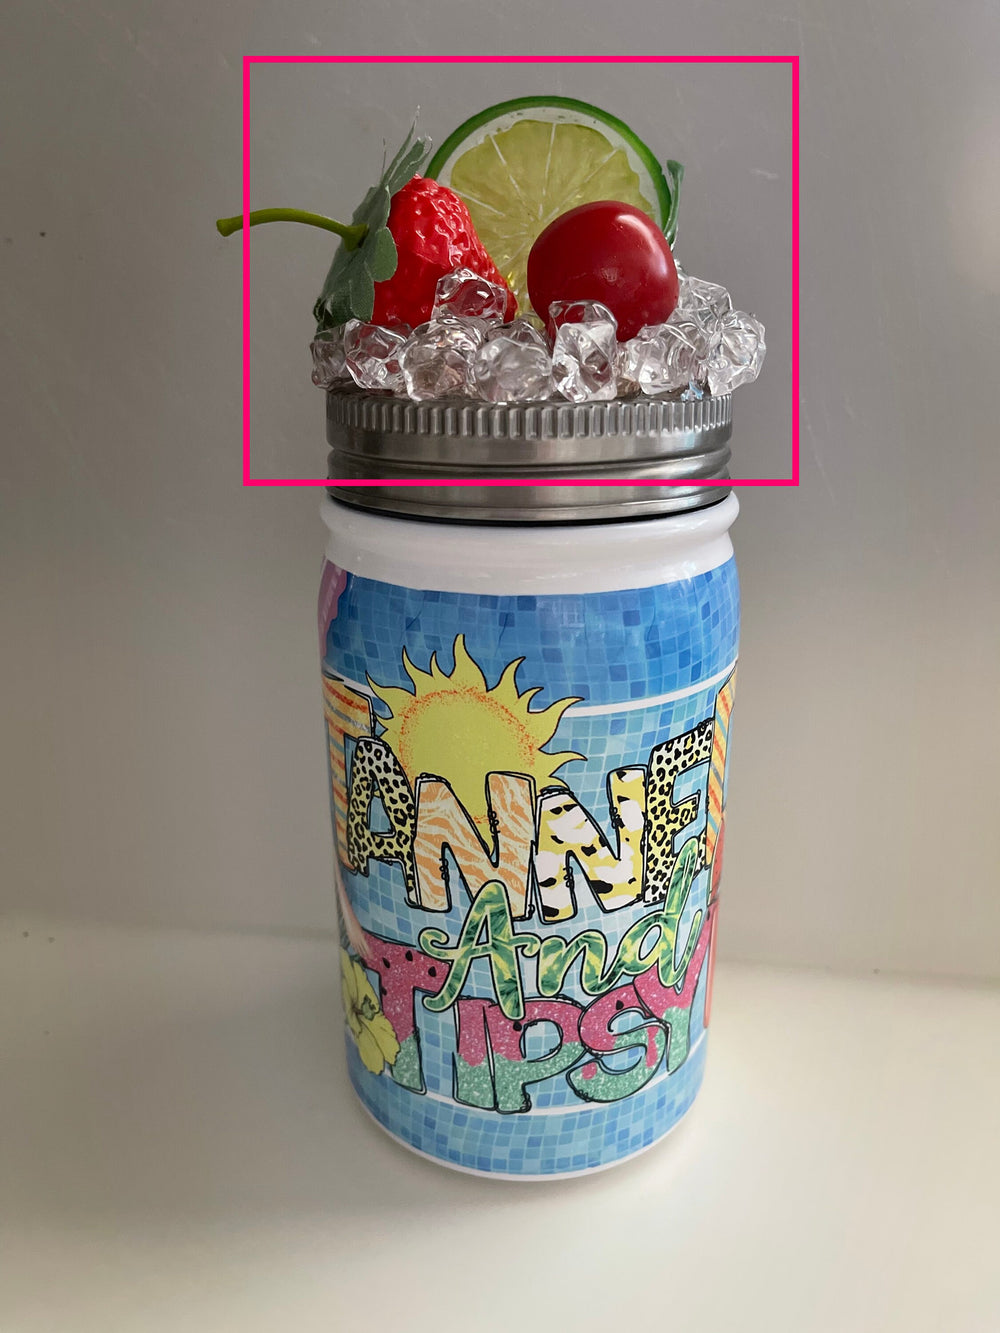 Strawberry + Lime + Cherry - Fruit Tumbler Topper that fit the 17 oz Stainless MASON JAR Tumbler Top - Fruit Topped Tumbler Toppers